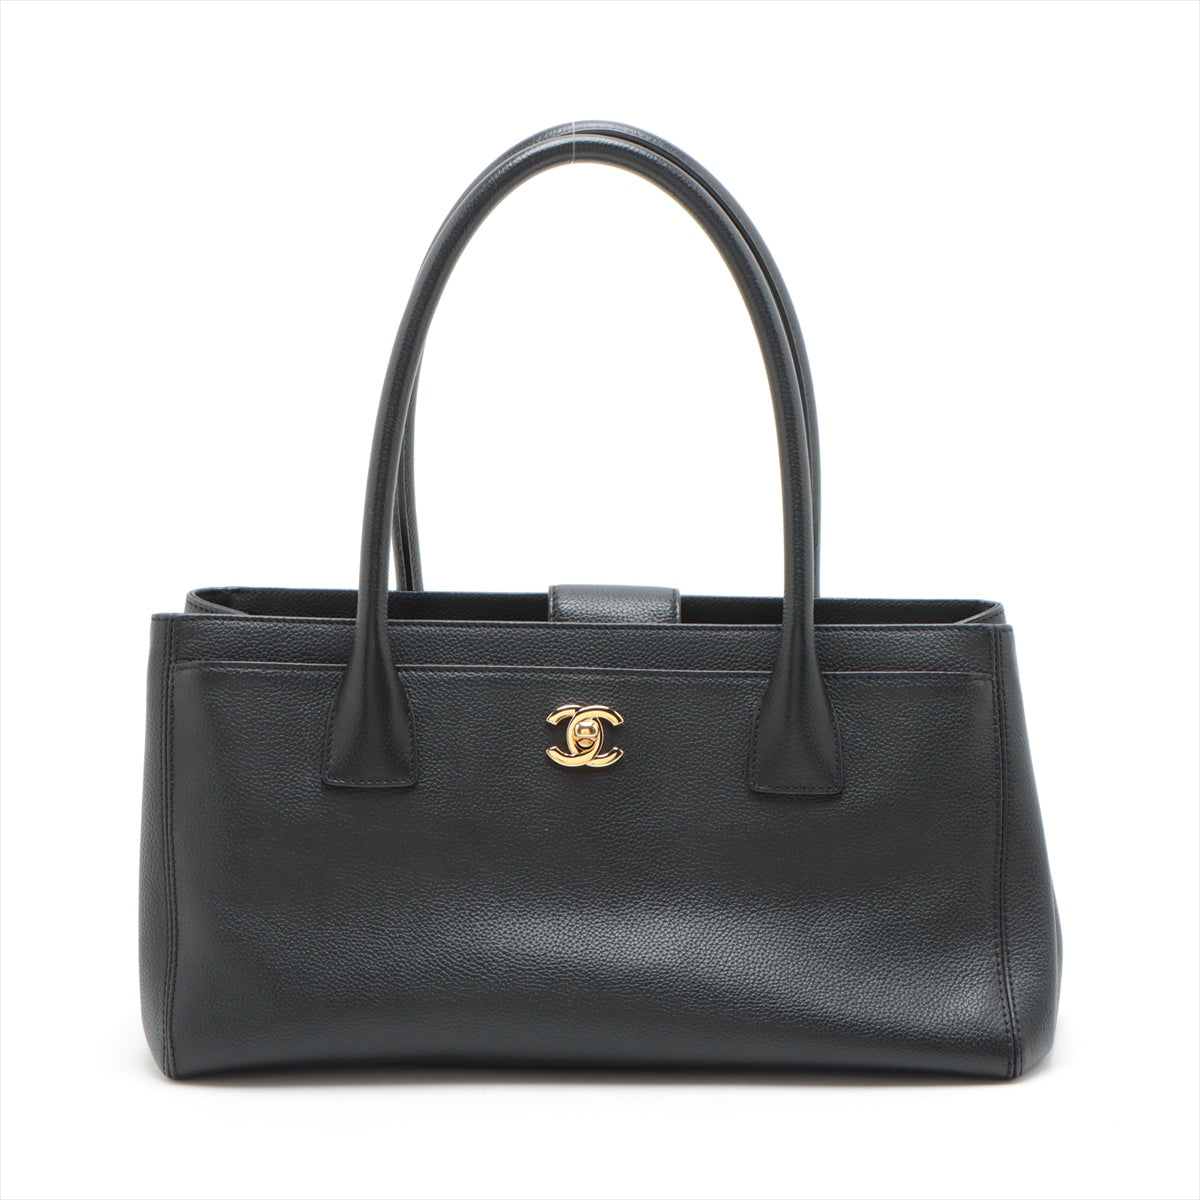 Chanel Executive Leather Tote Bag Black Gold  17th